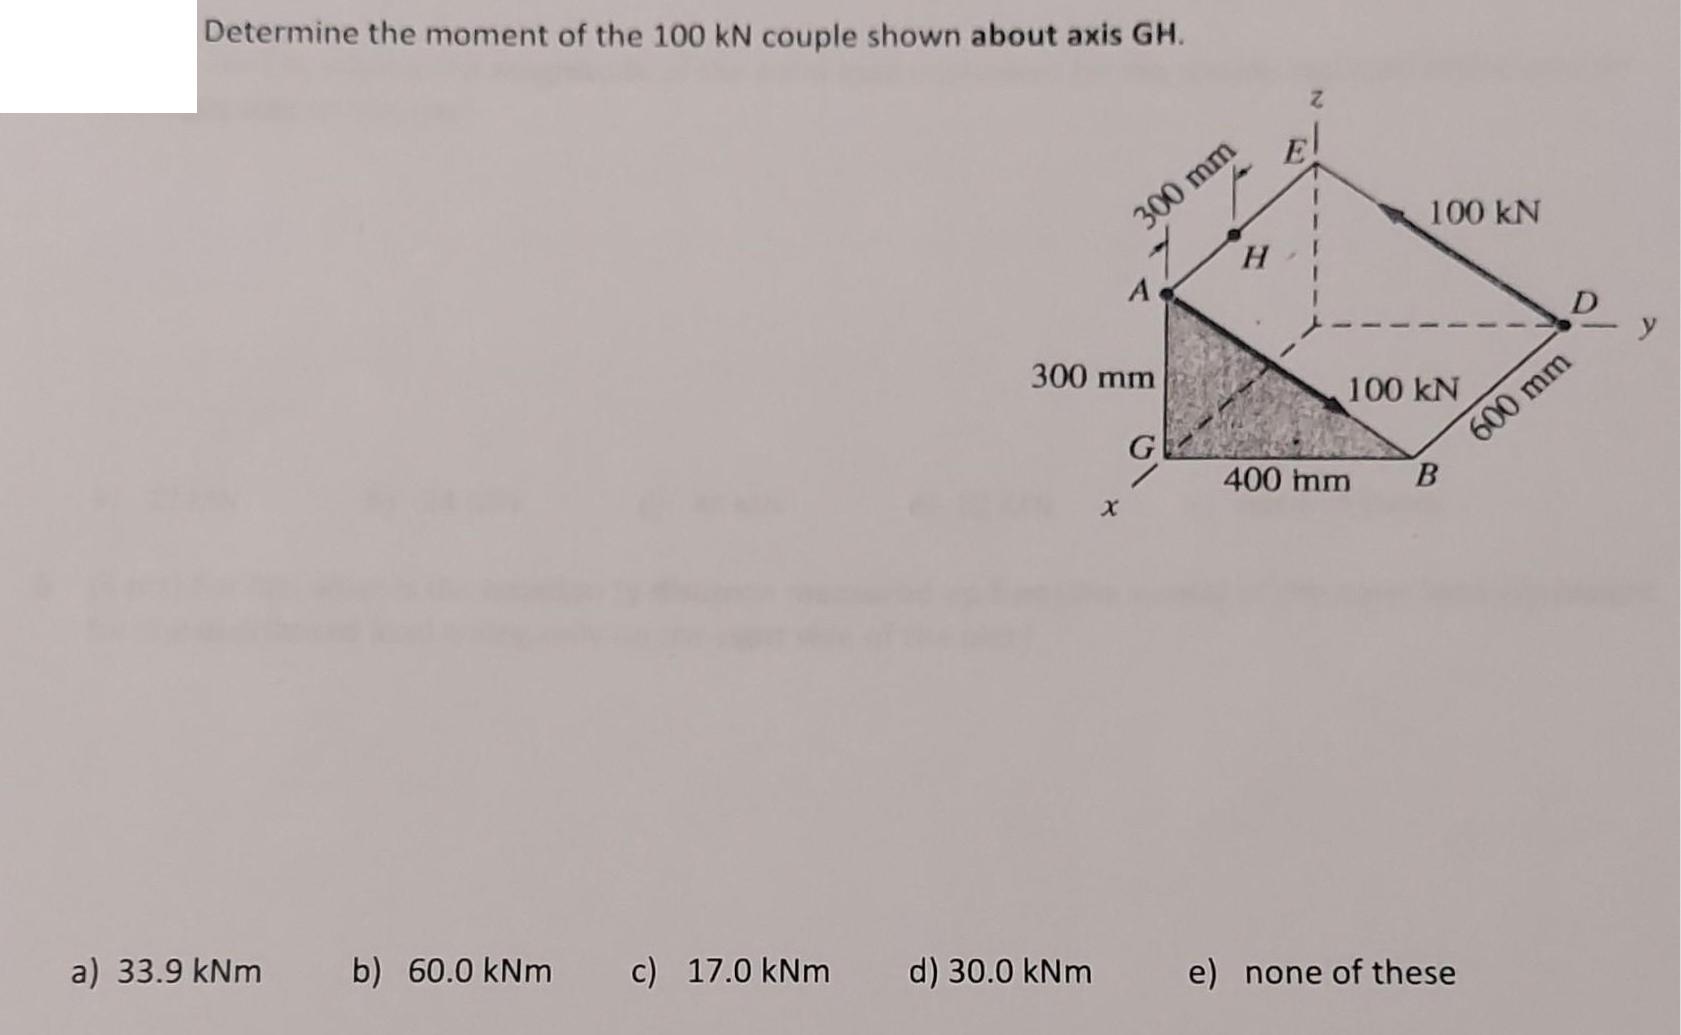 Determine the moment of the 100 kN couple shown about axis GH. a) 33.9 kNm b) 60.0 kNm c) 17.0 kNm 300 mm 300